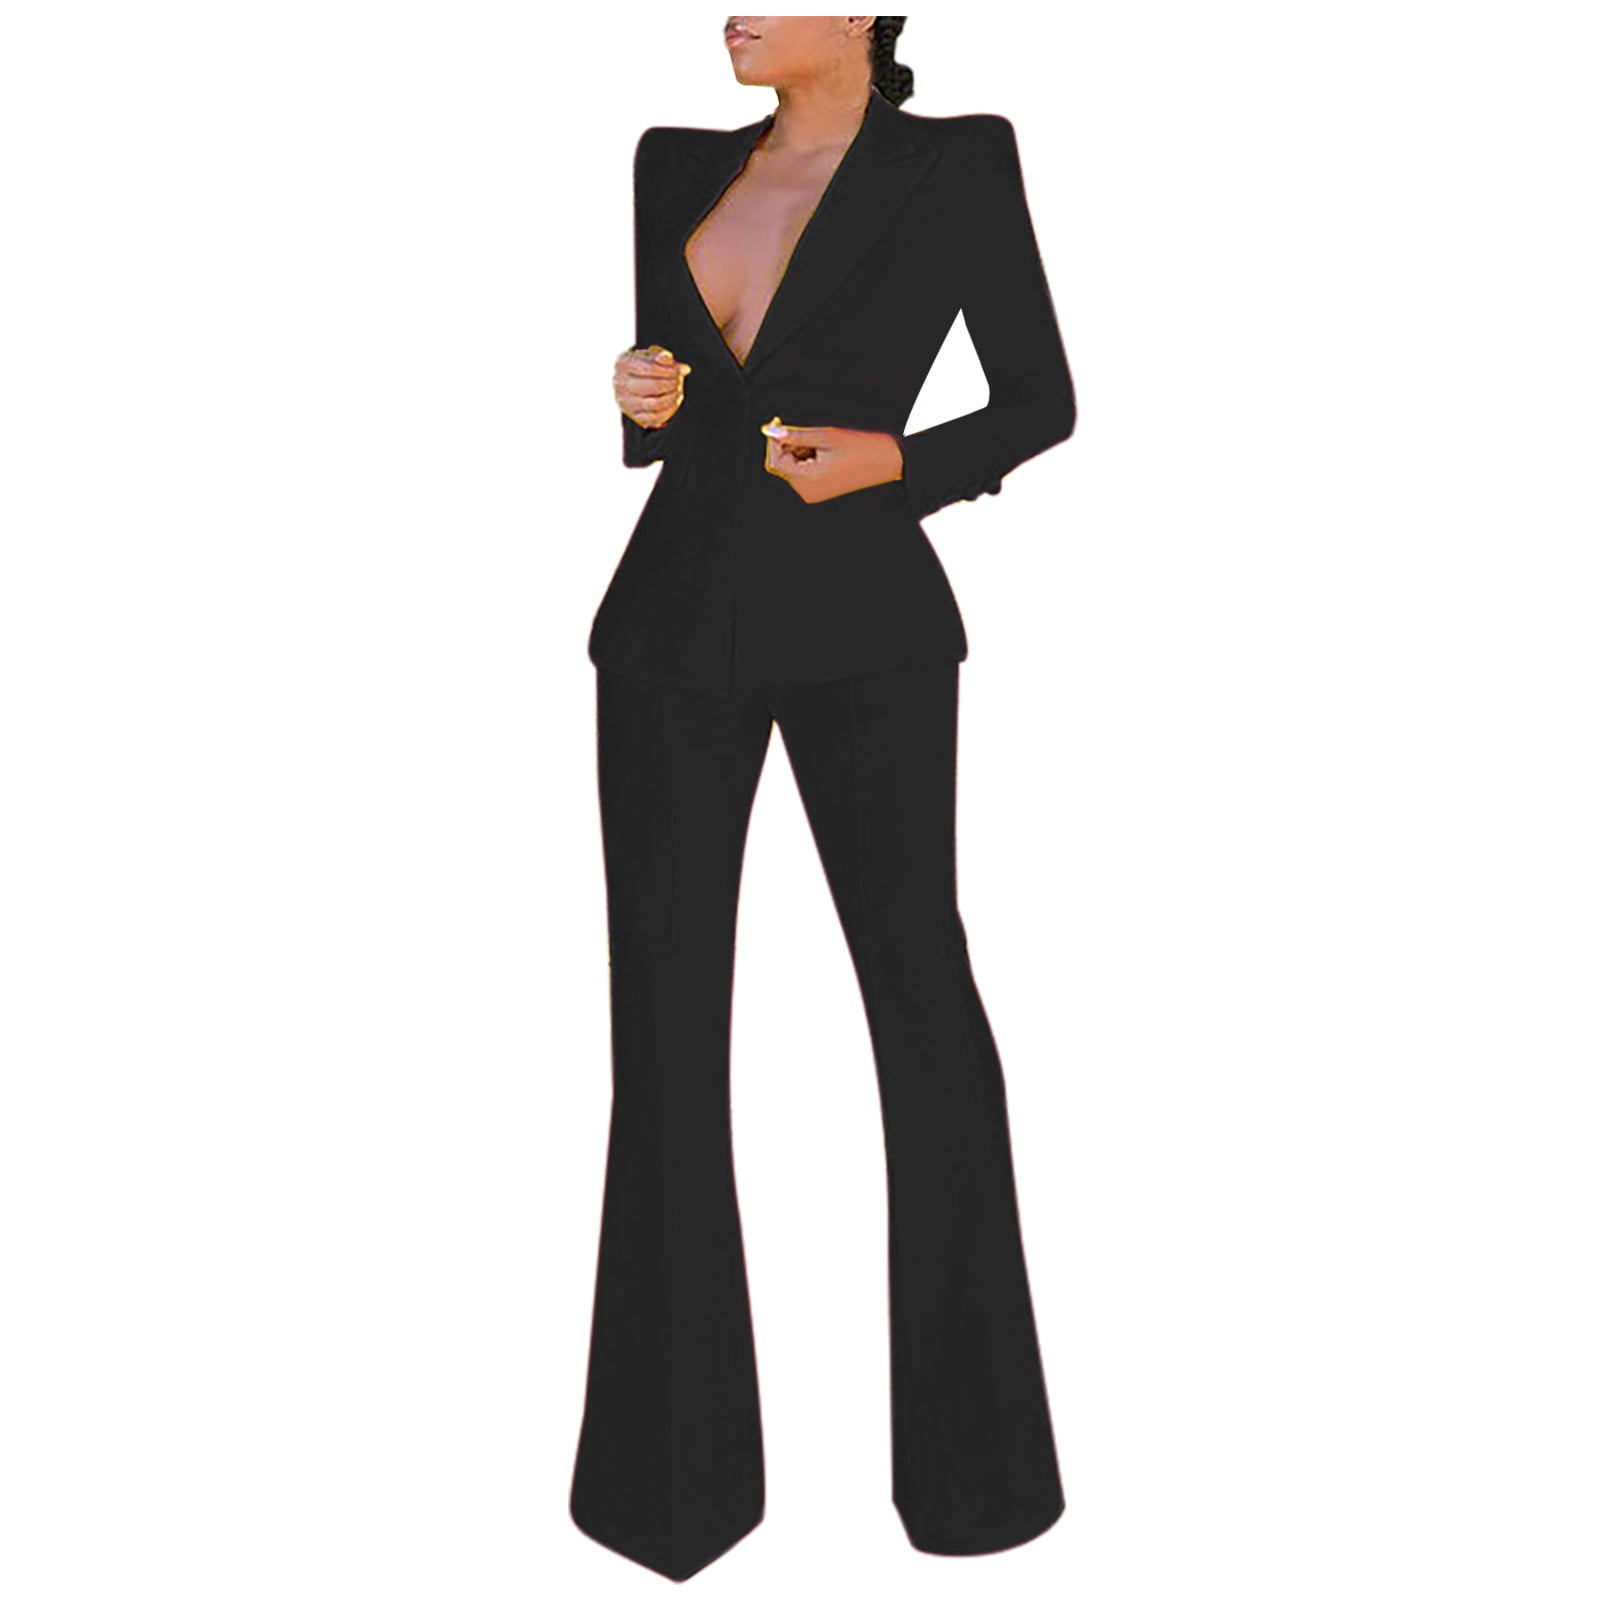  Suit for Women Slim Fit 2 Piece Pants Suit Set Womens Black Suit  Blazers Jackets for Work Office Lady Casual Formal Suit Outfits : Clothing,  Shoes & Jewelry